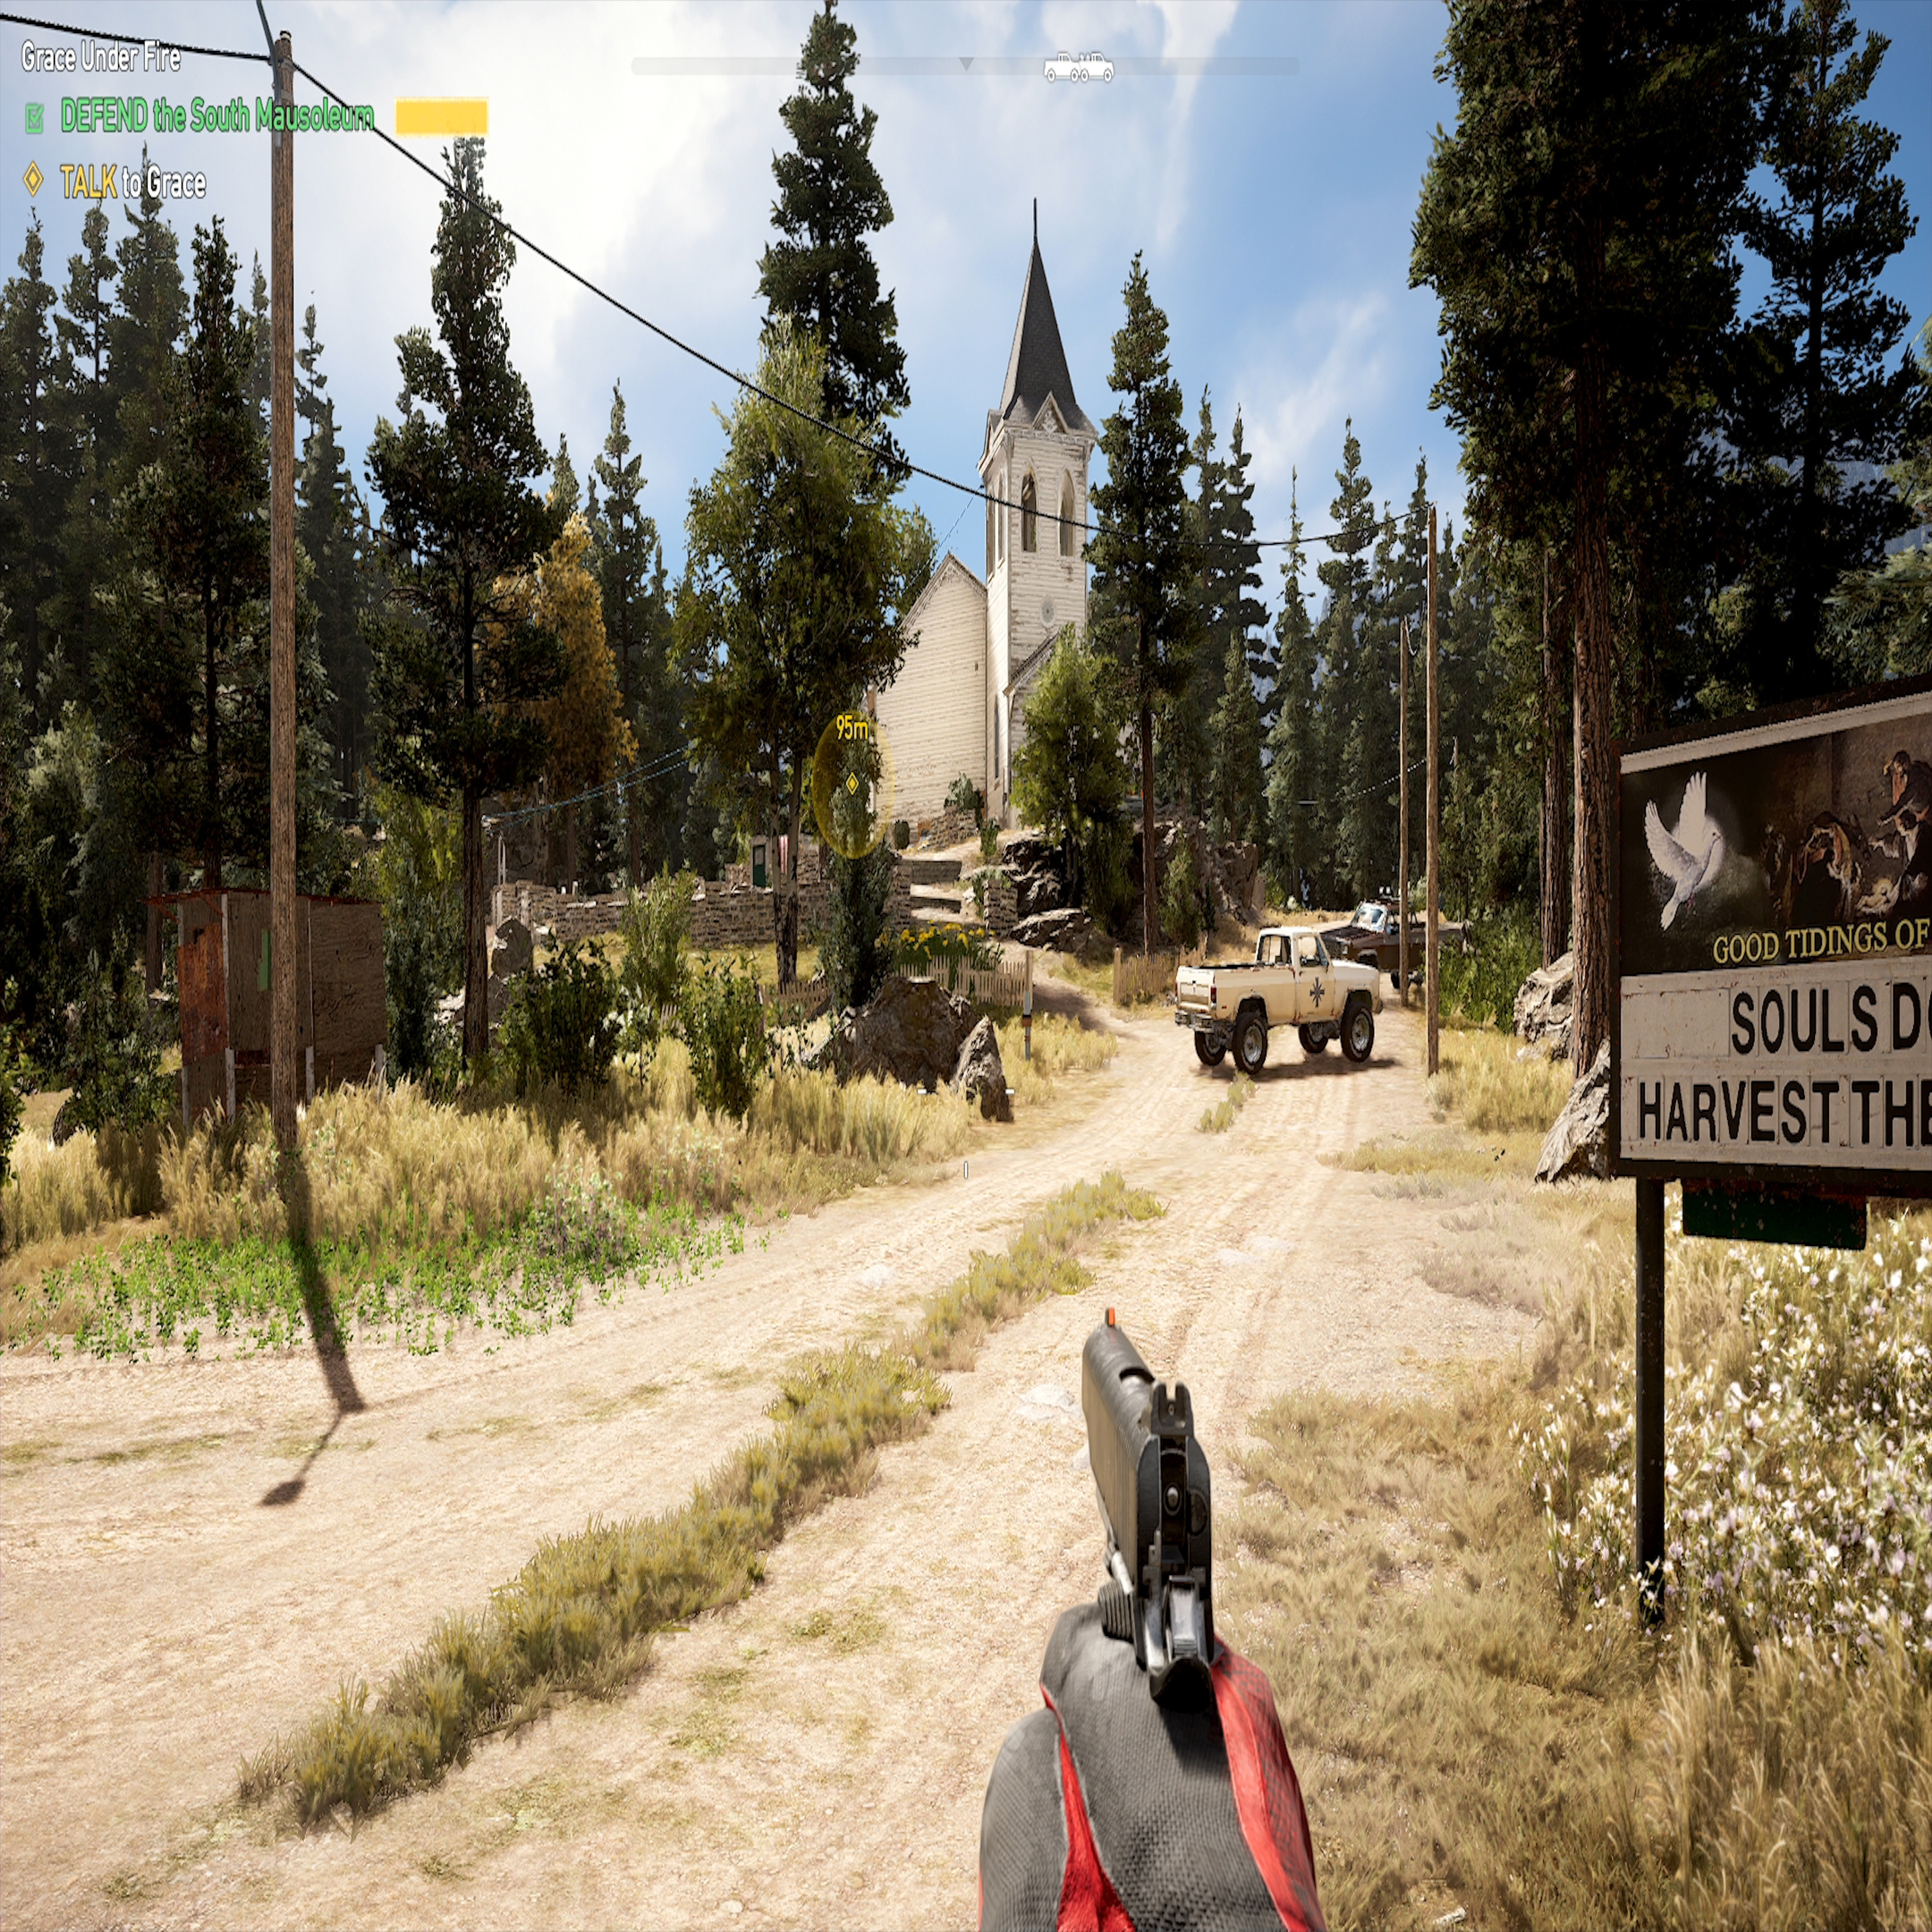 Is Far Cry 5 Crossplay Compatible? - Cloud Gaming Battle